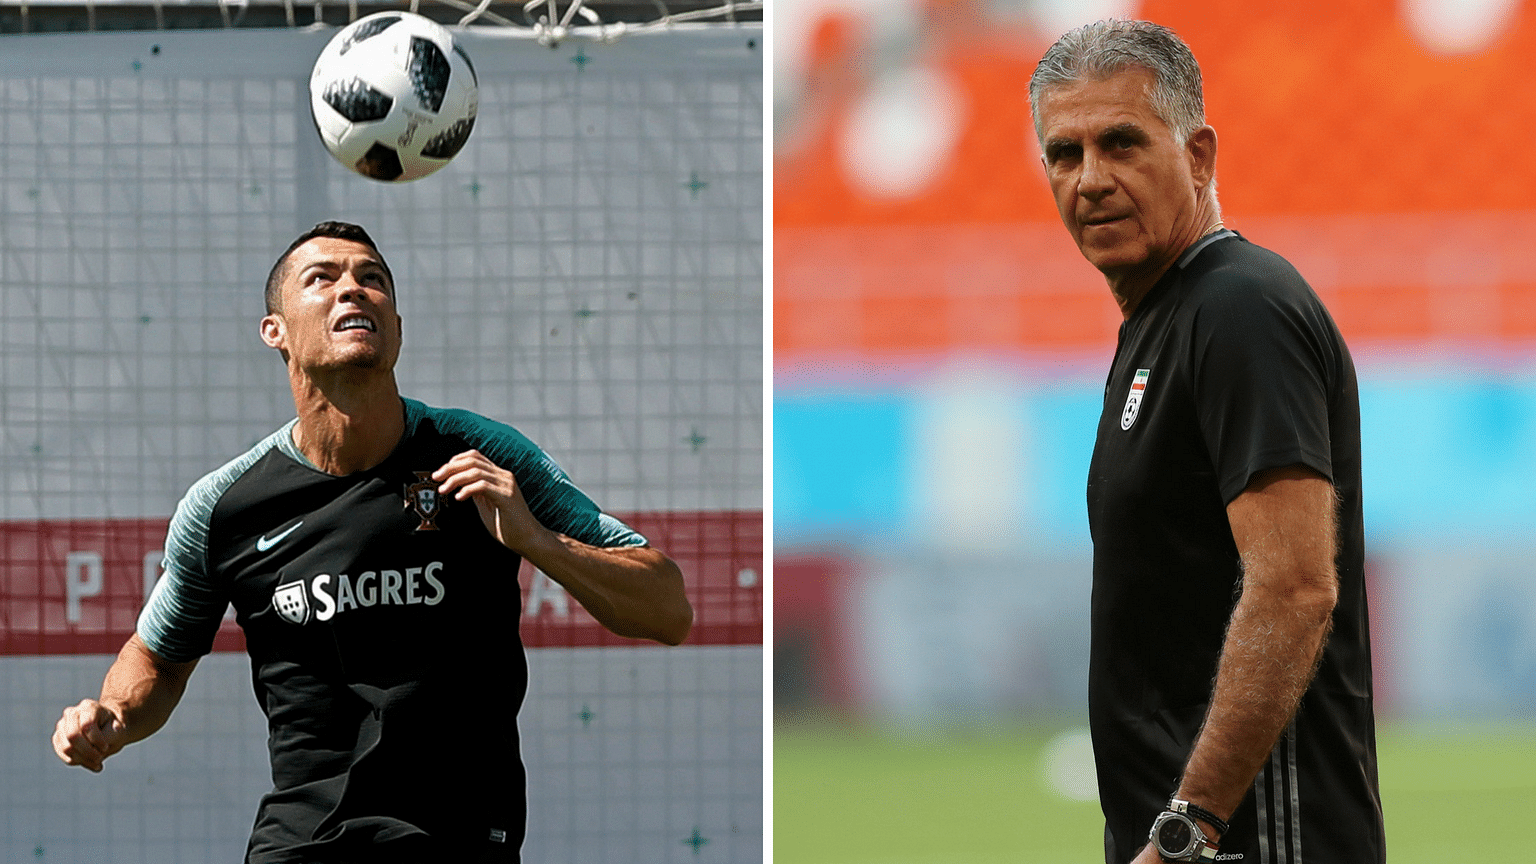 Portugal’s Cristiano Ronaldo and Iran’s coach Carlos Queiroz on the eve of their Group B match on Sunday.